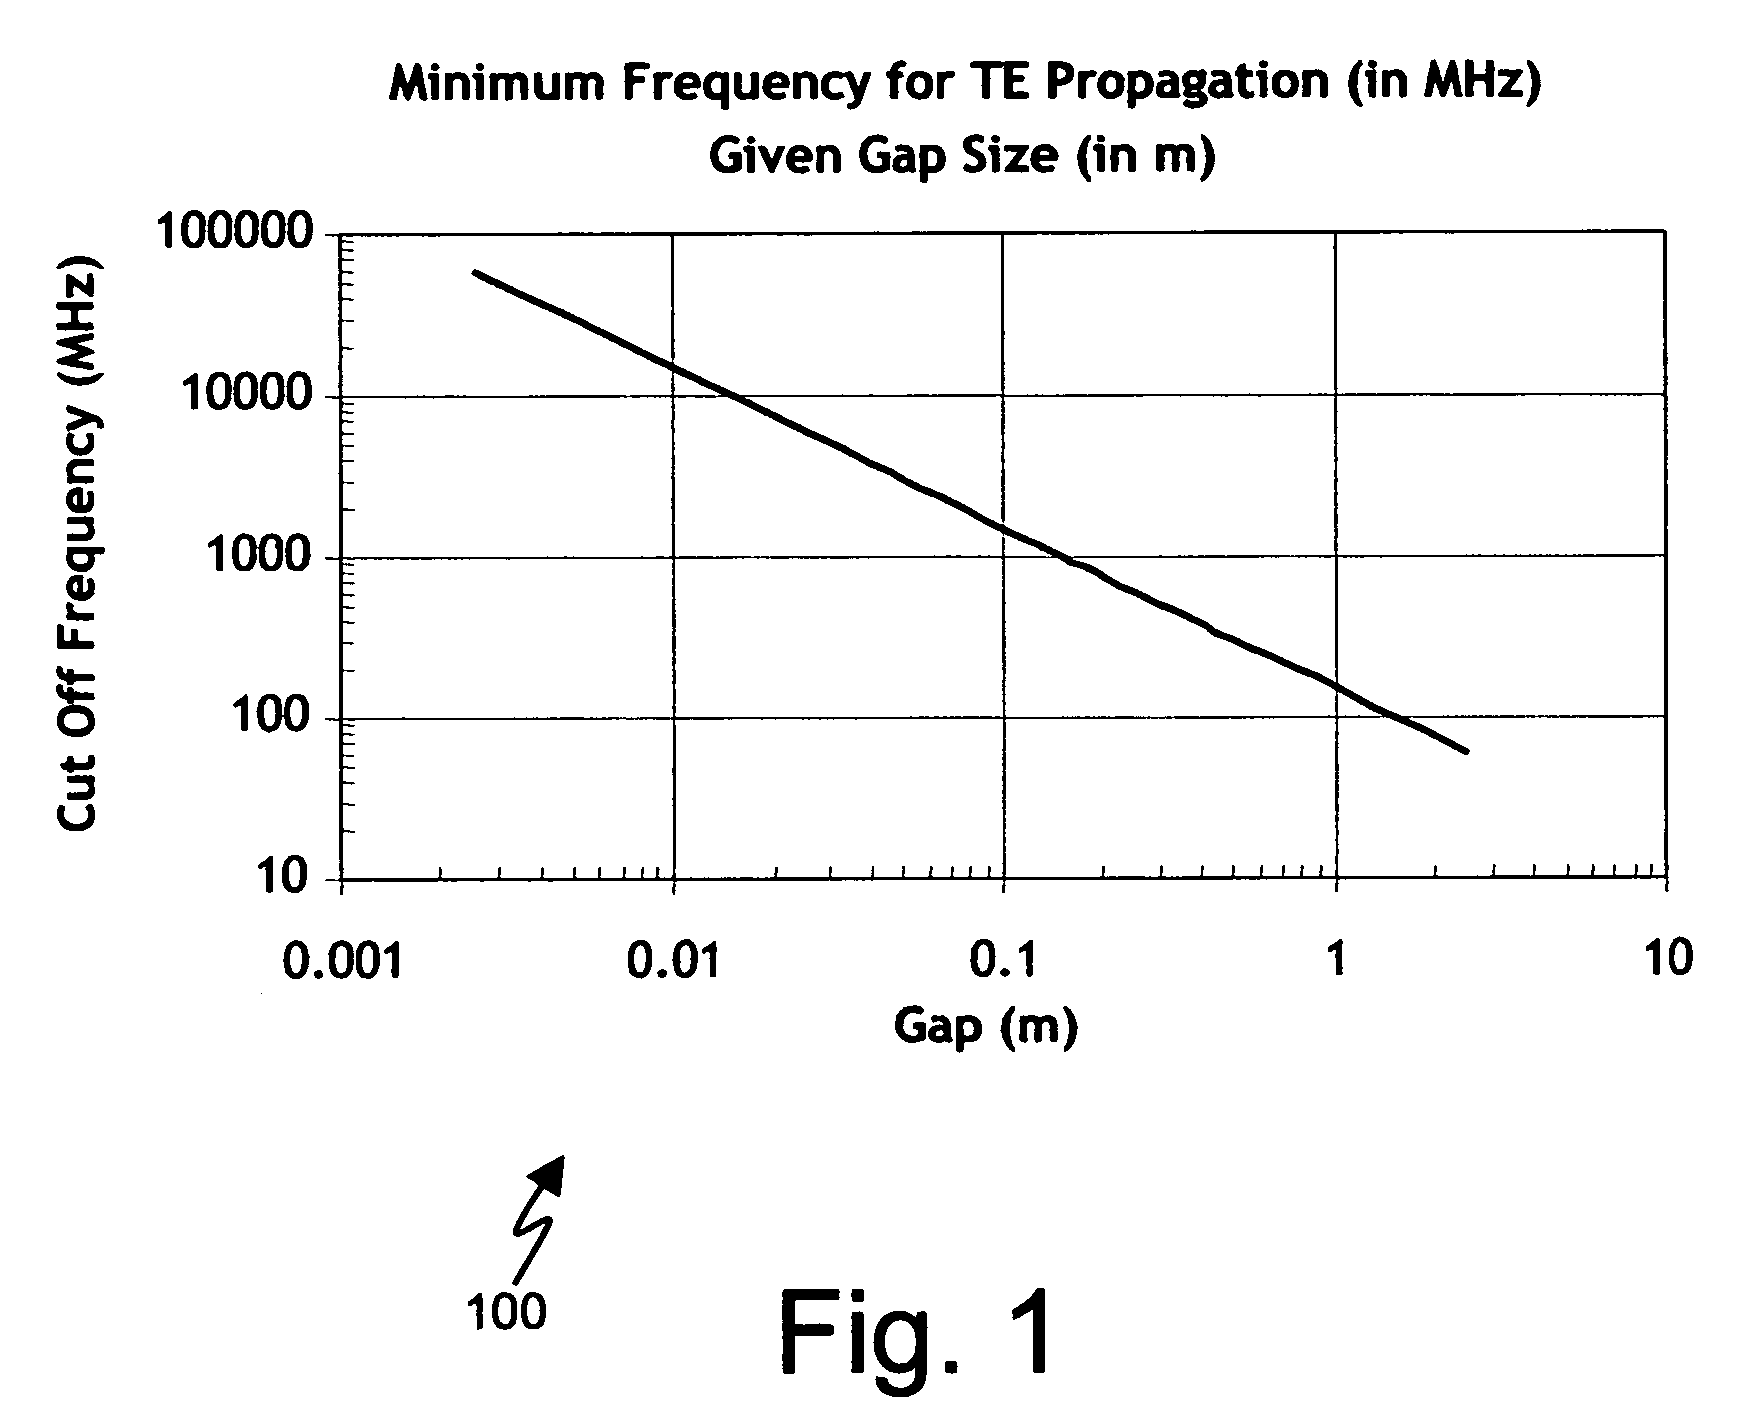 Low frequency asset tag tracking system and method